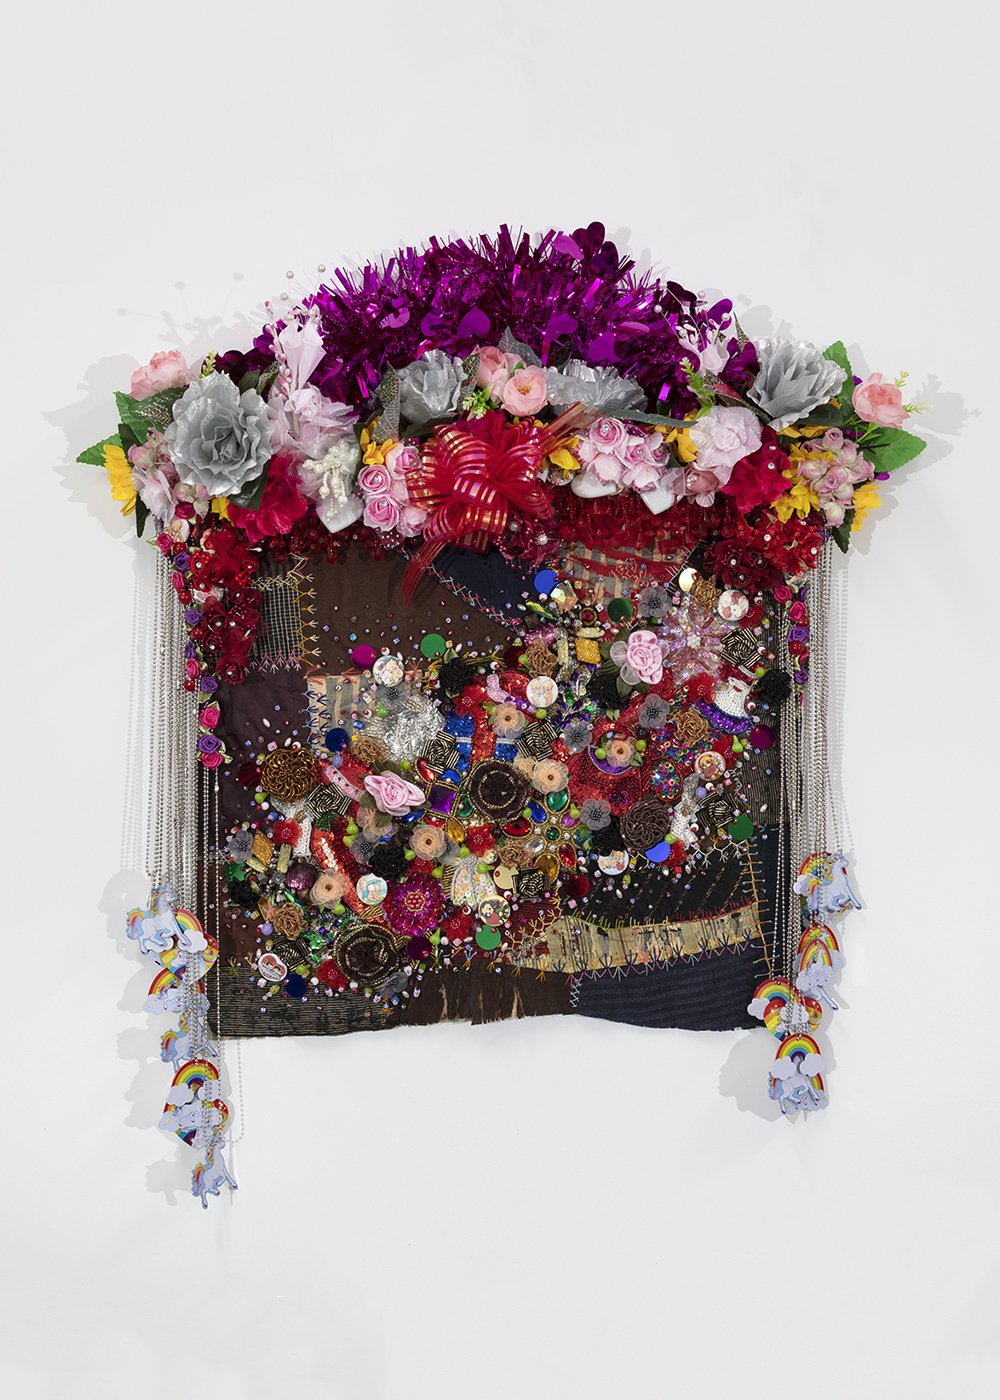   Shroud #5 (study) , 2022, Found ‘Crazy’ quilt ca. 1900, trim, fabric flowers, garland, costume jewelry, buttons, plastic flowers, beads, sequins, thread, fabric, pine, 31 x 26 x 5” 